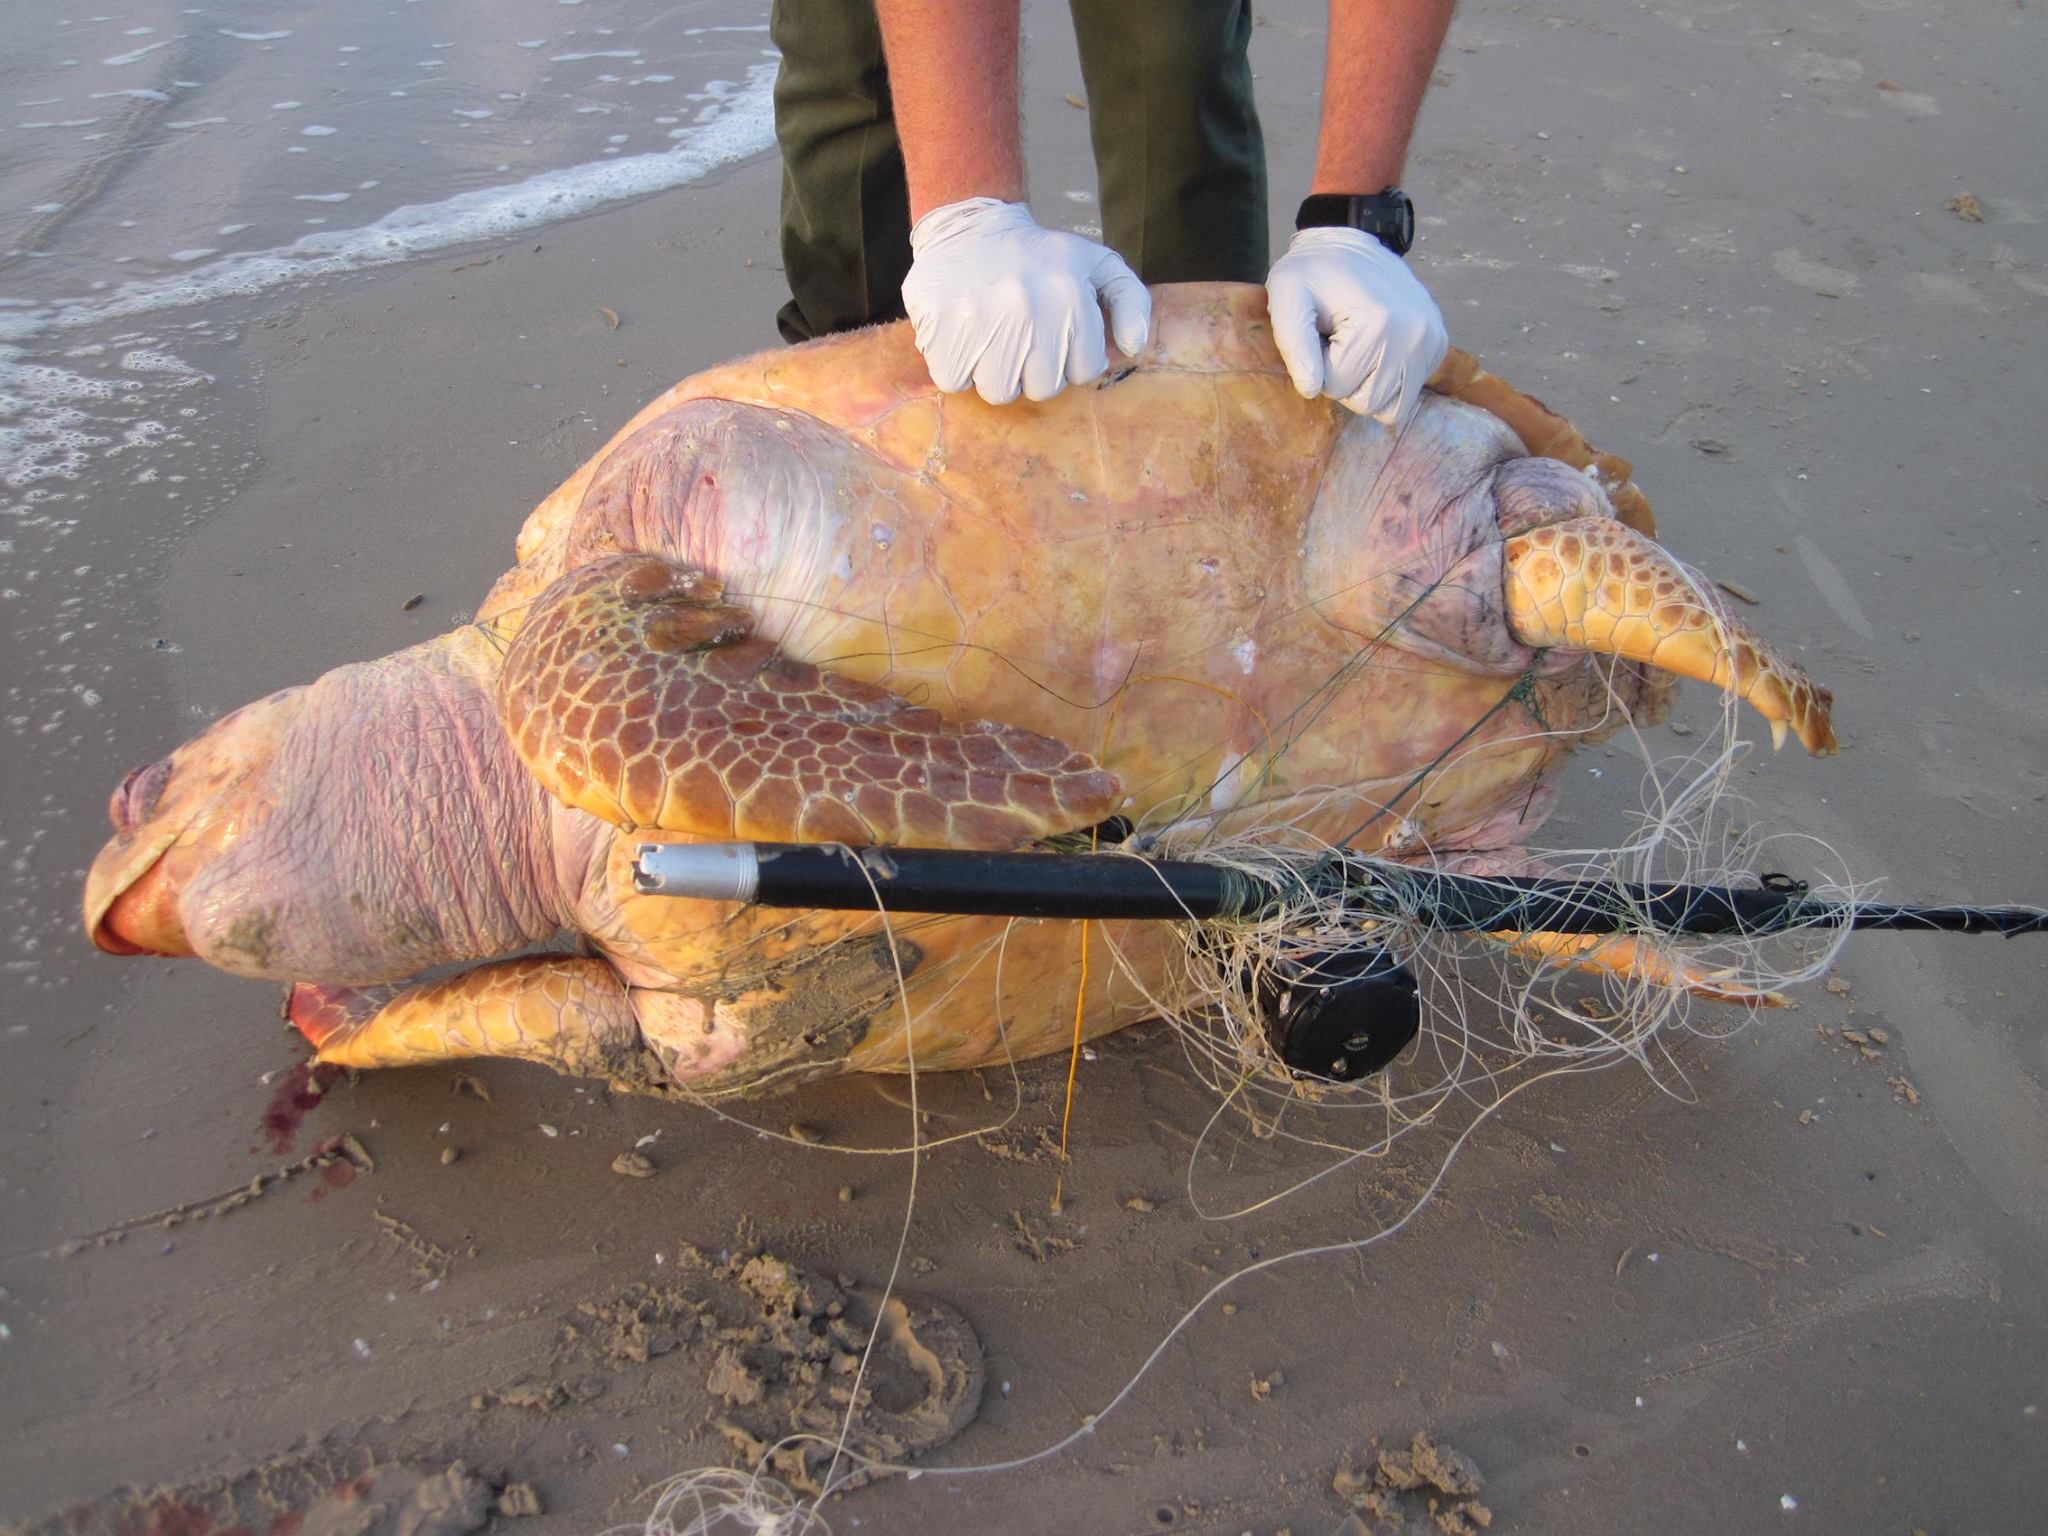 Turtle Found Dead With Fishing Line Tangled Around Its Throat